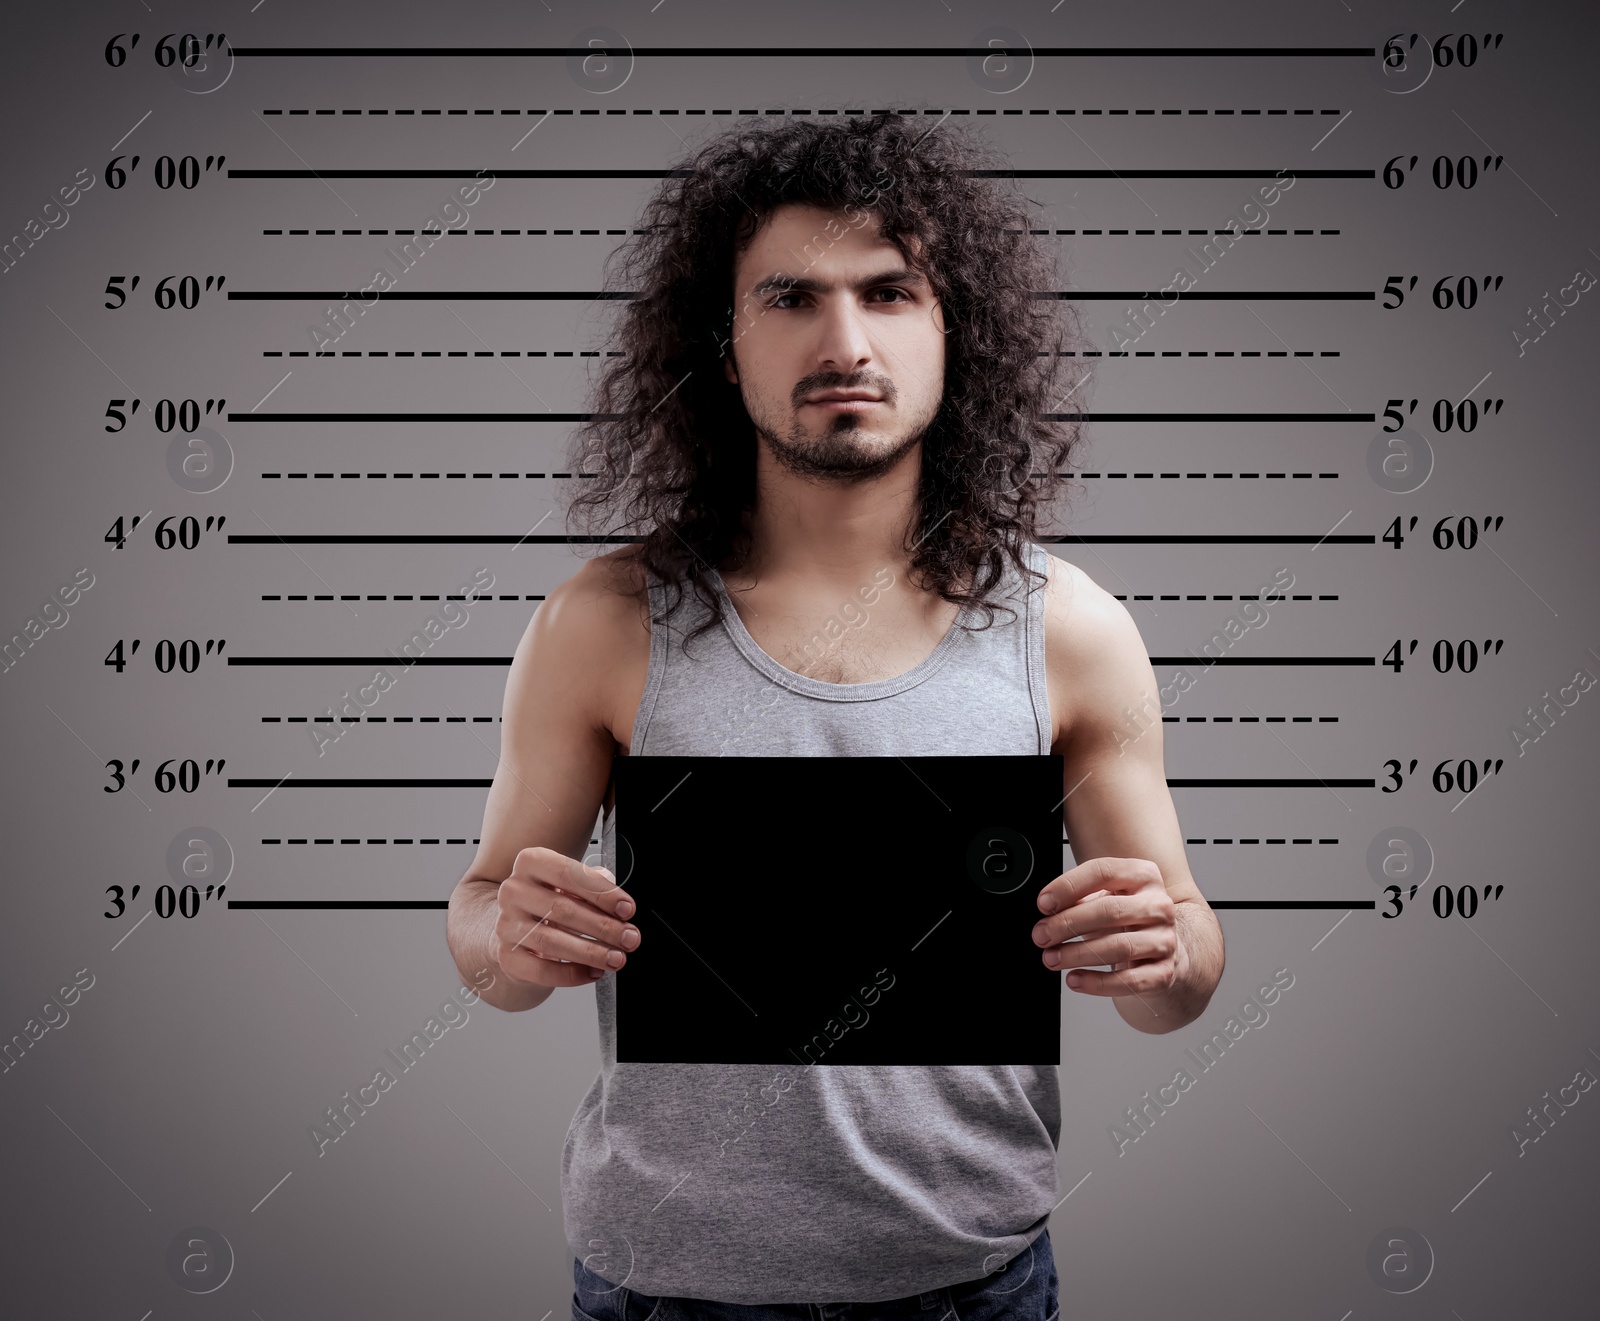 Image of Criminal mugshot. Arrested man with blank card against height chart